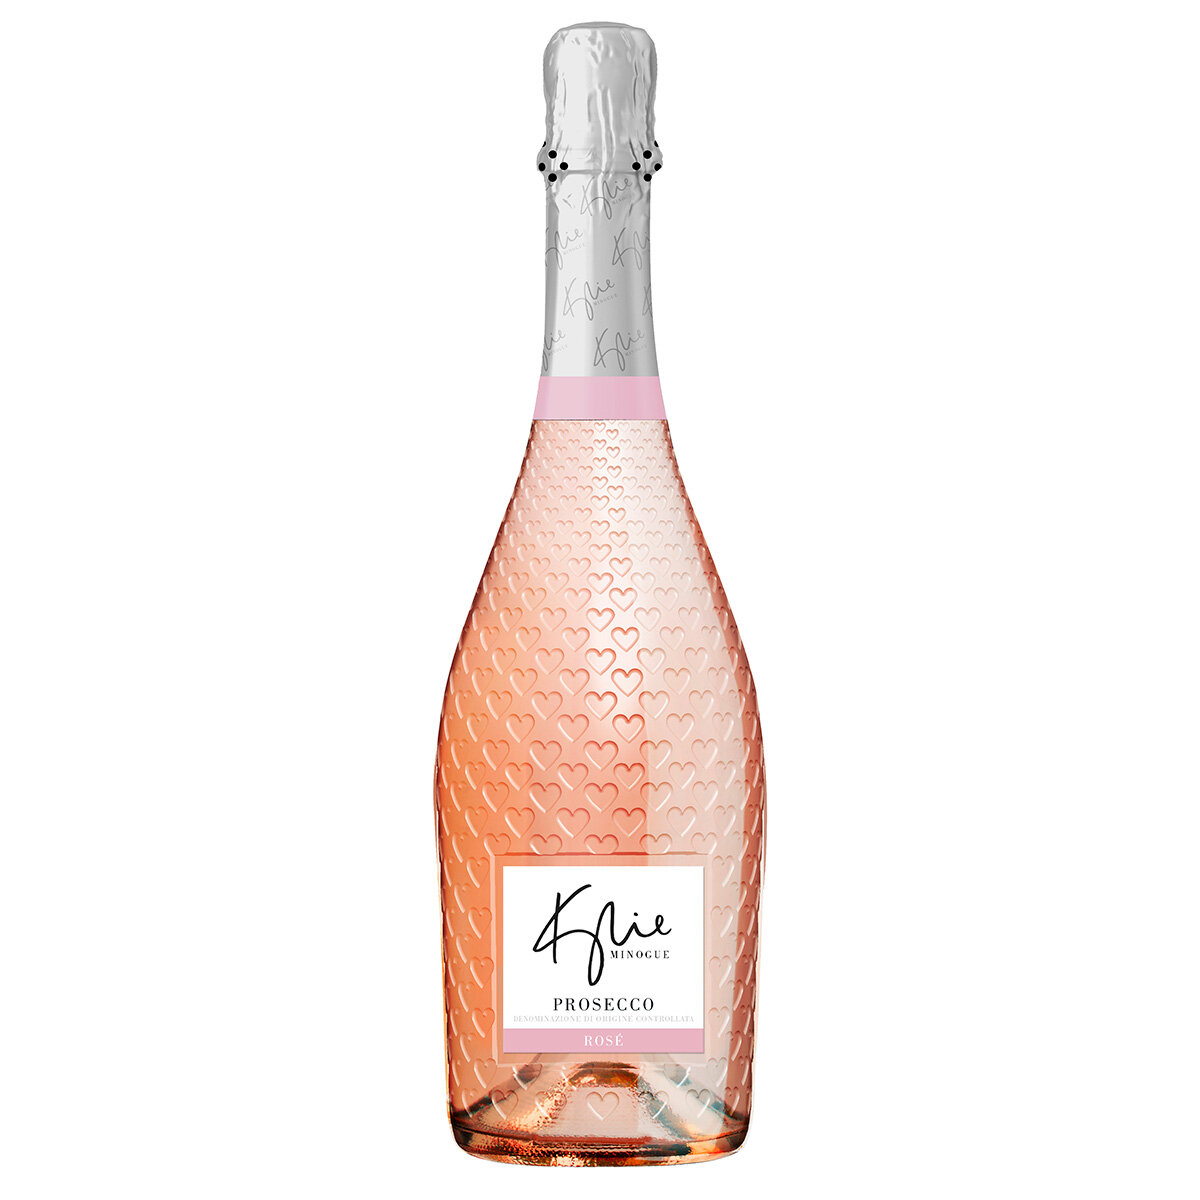 Kylie Minogue Prosecco Rose, 75cl